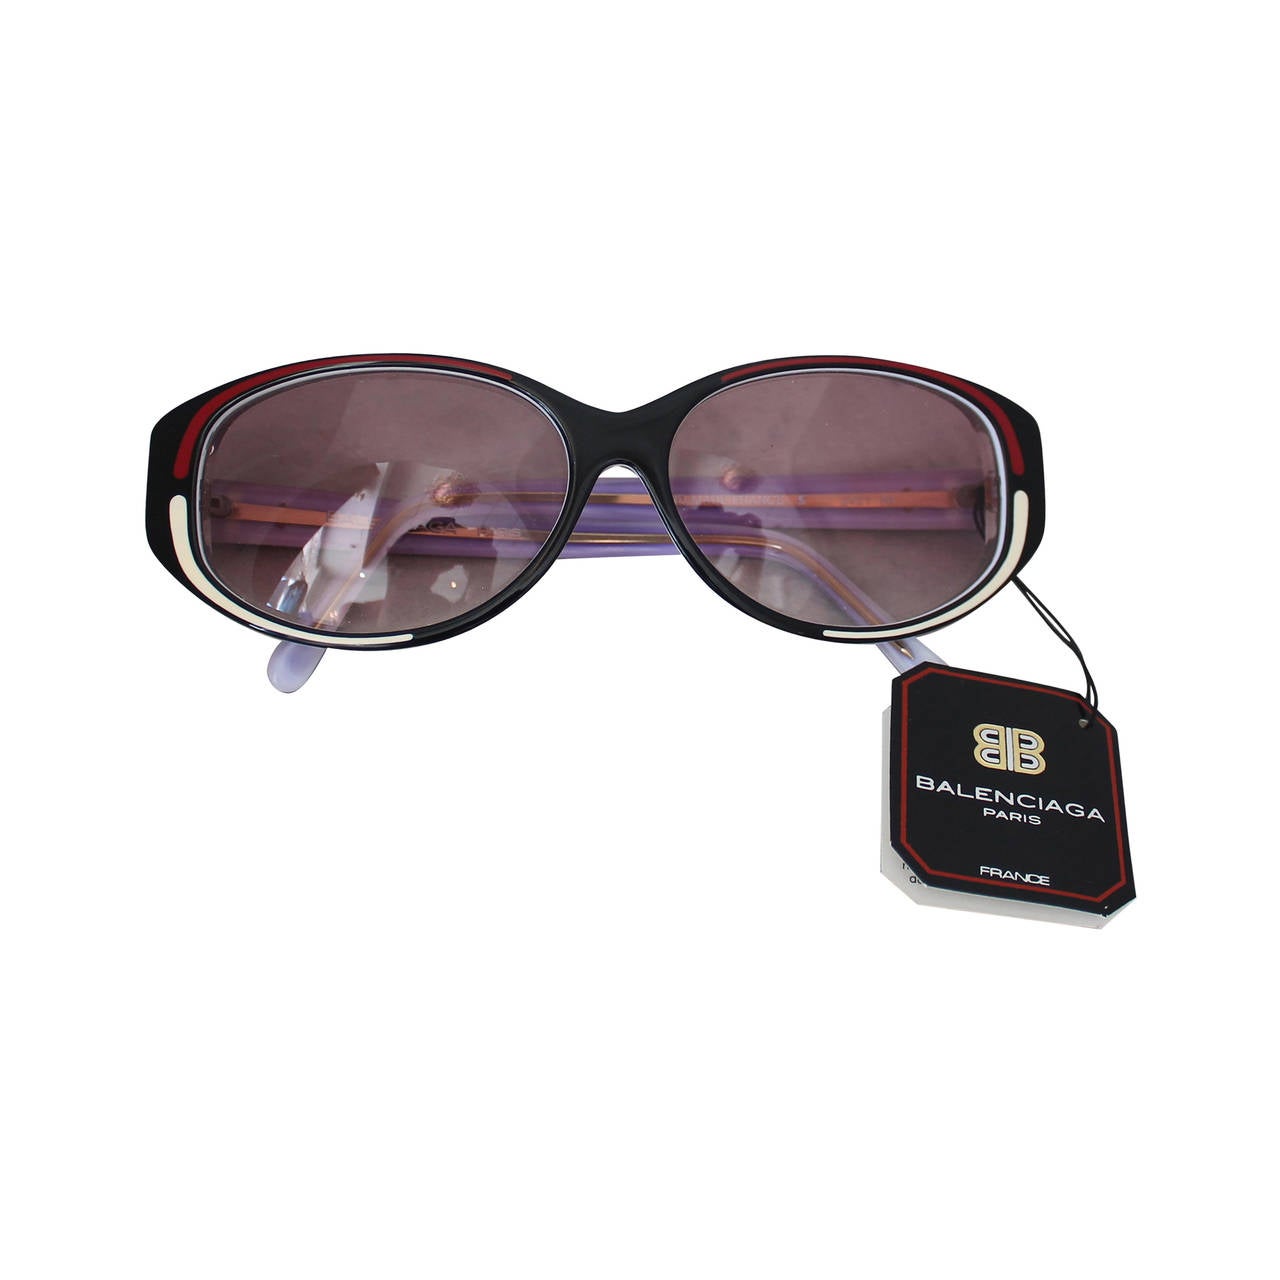 Vintage 1970s Balenciaga Black and Red Sunglasses For Sale at 1stDibs |  1970s sunglasses